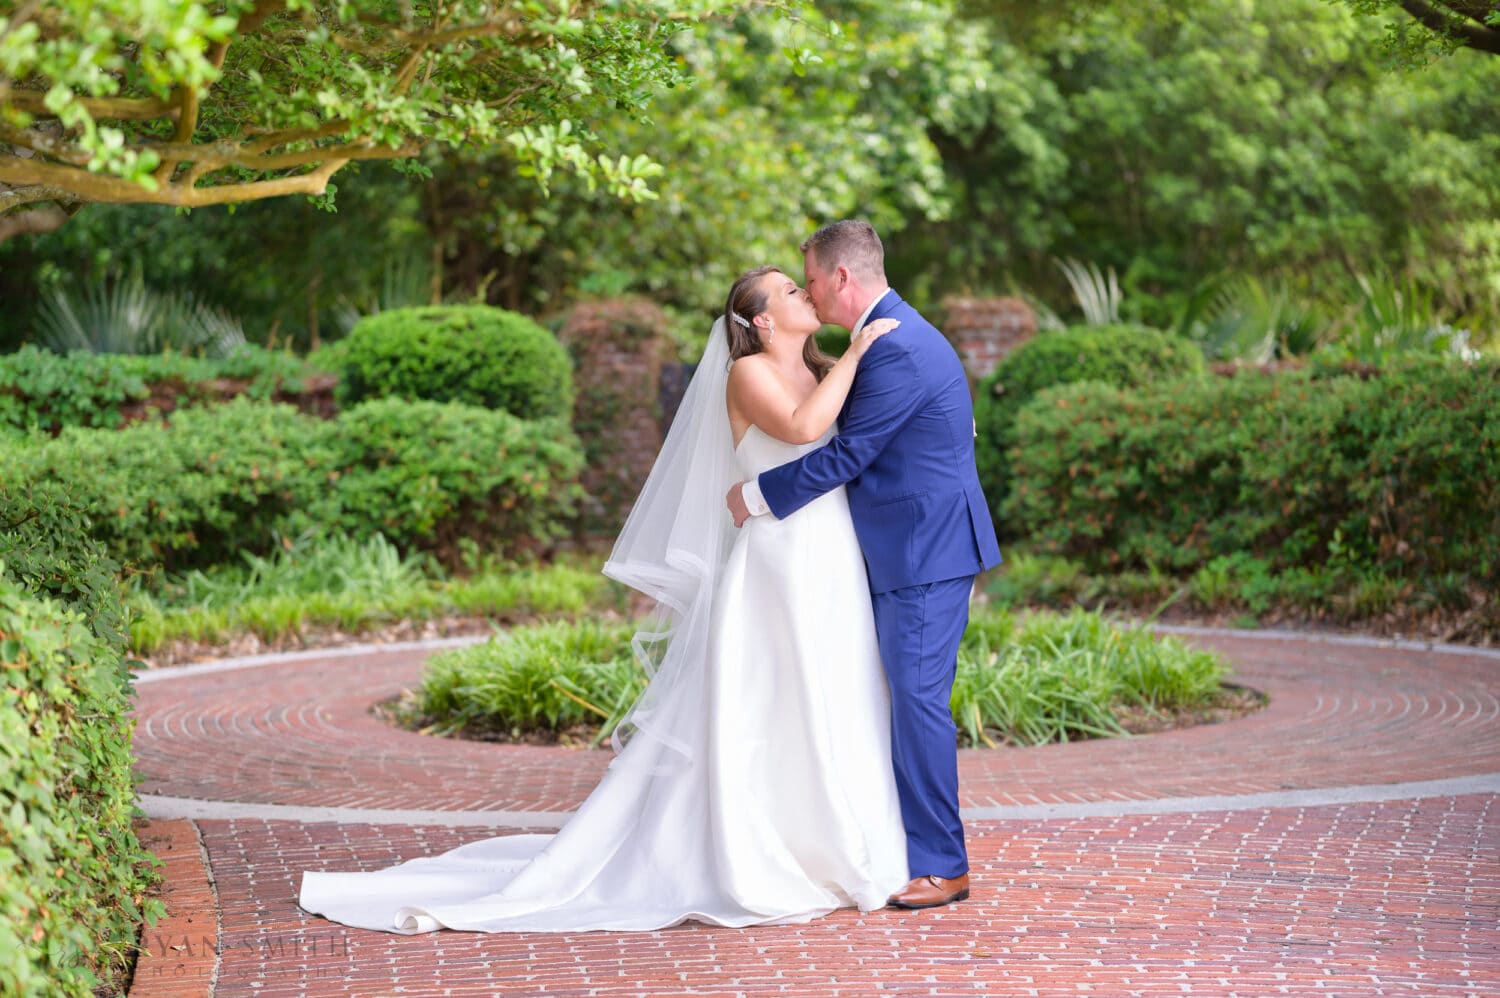 Kiss on the brick path - Pine Lakes Country Club